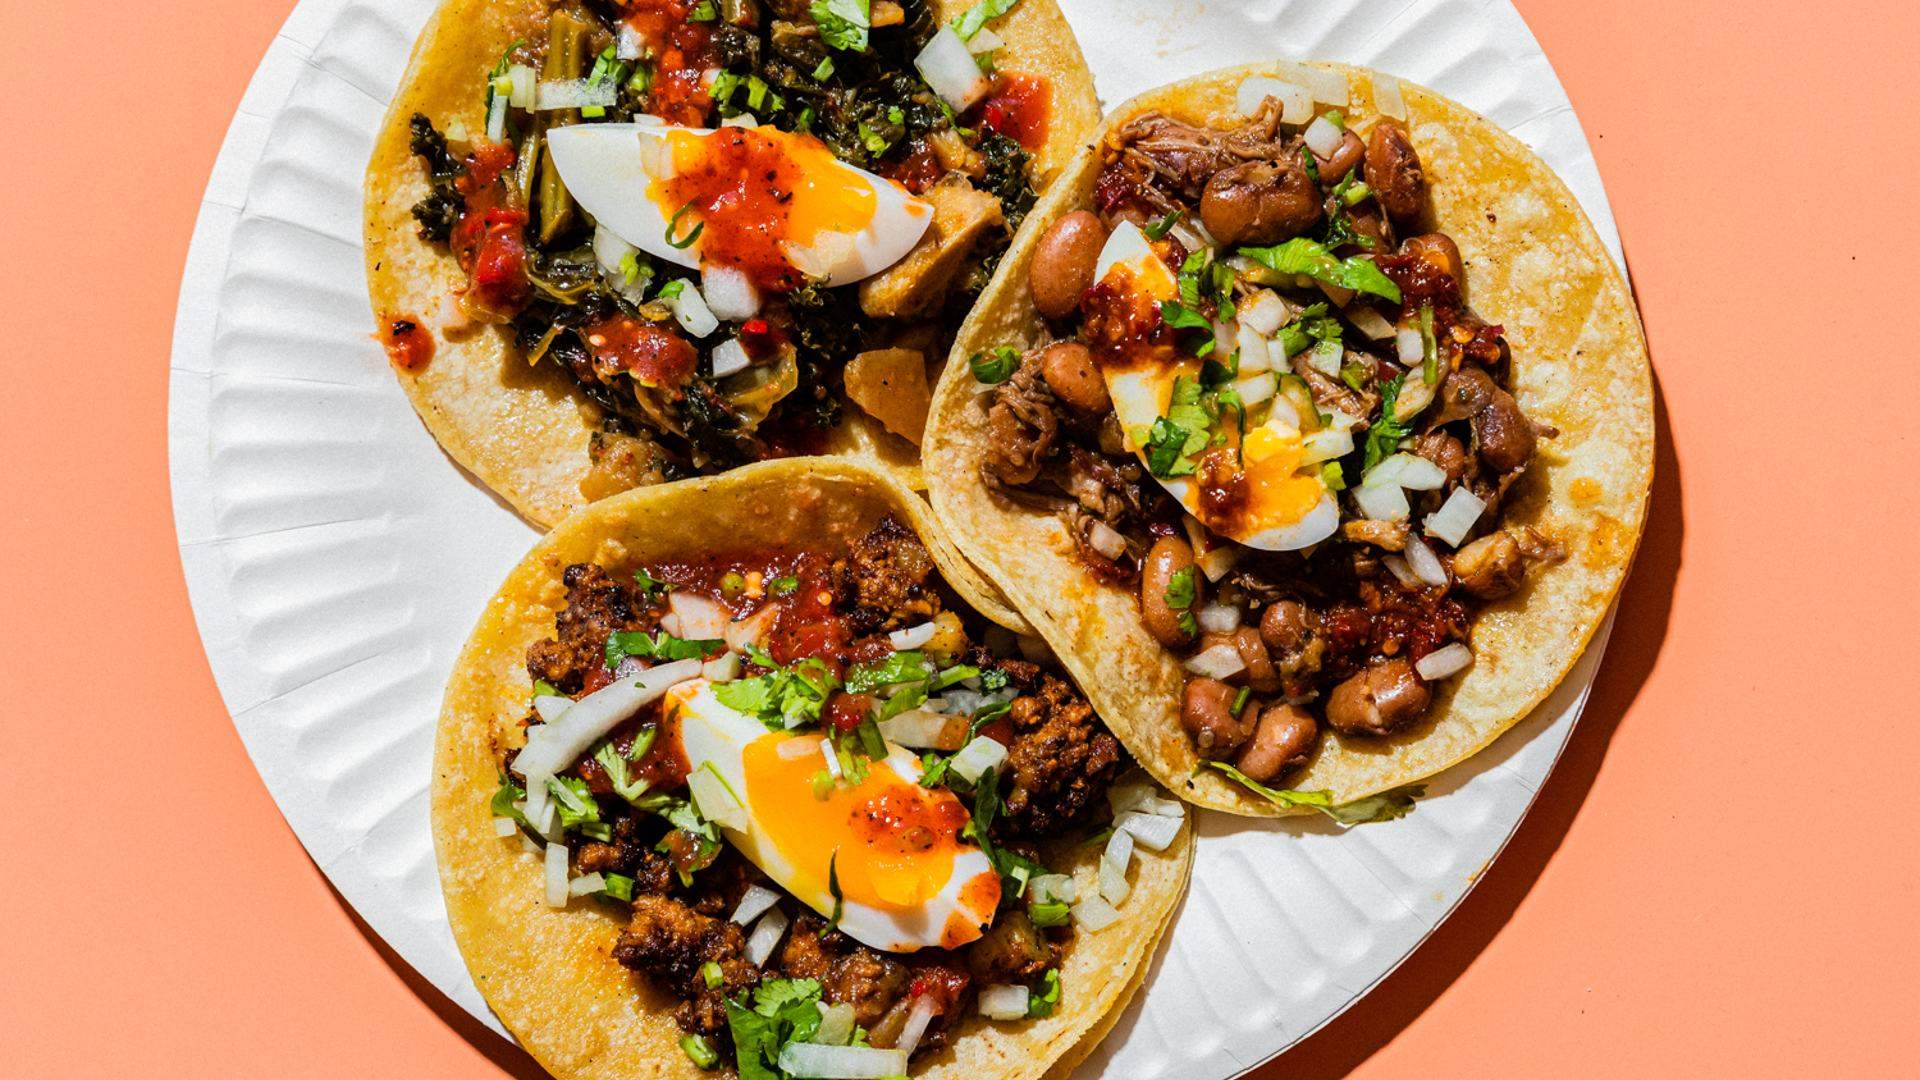 Cult Sydney Favourite Ricos Tacos Is Reopening Next Month in Redfern's Norfolk Hotel